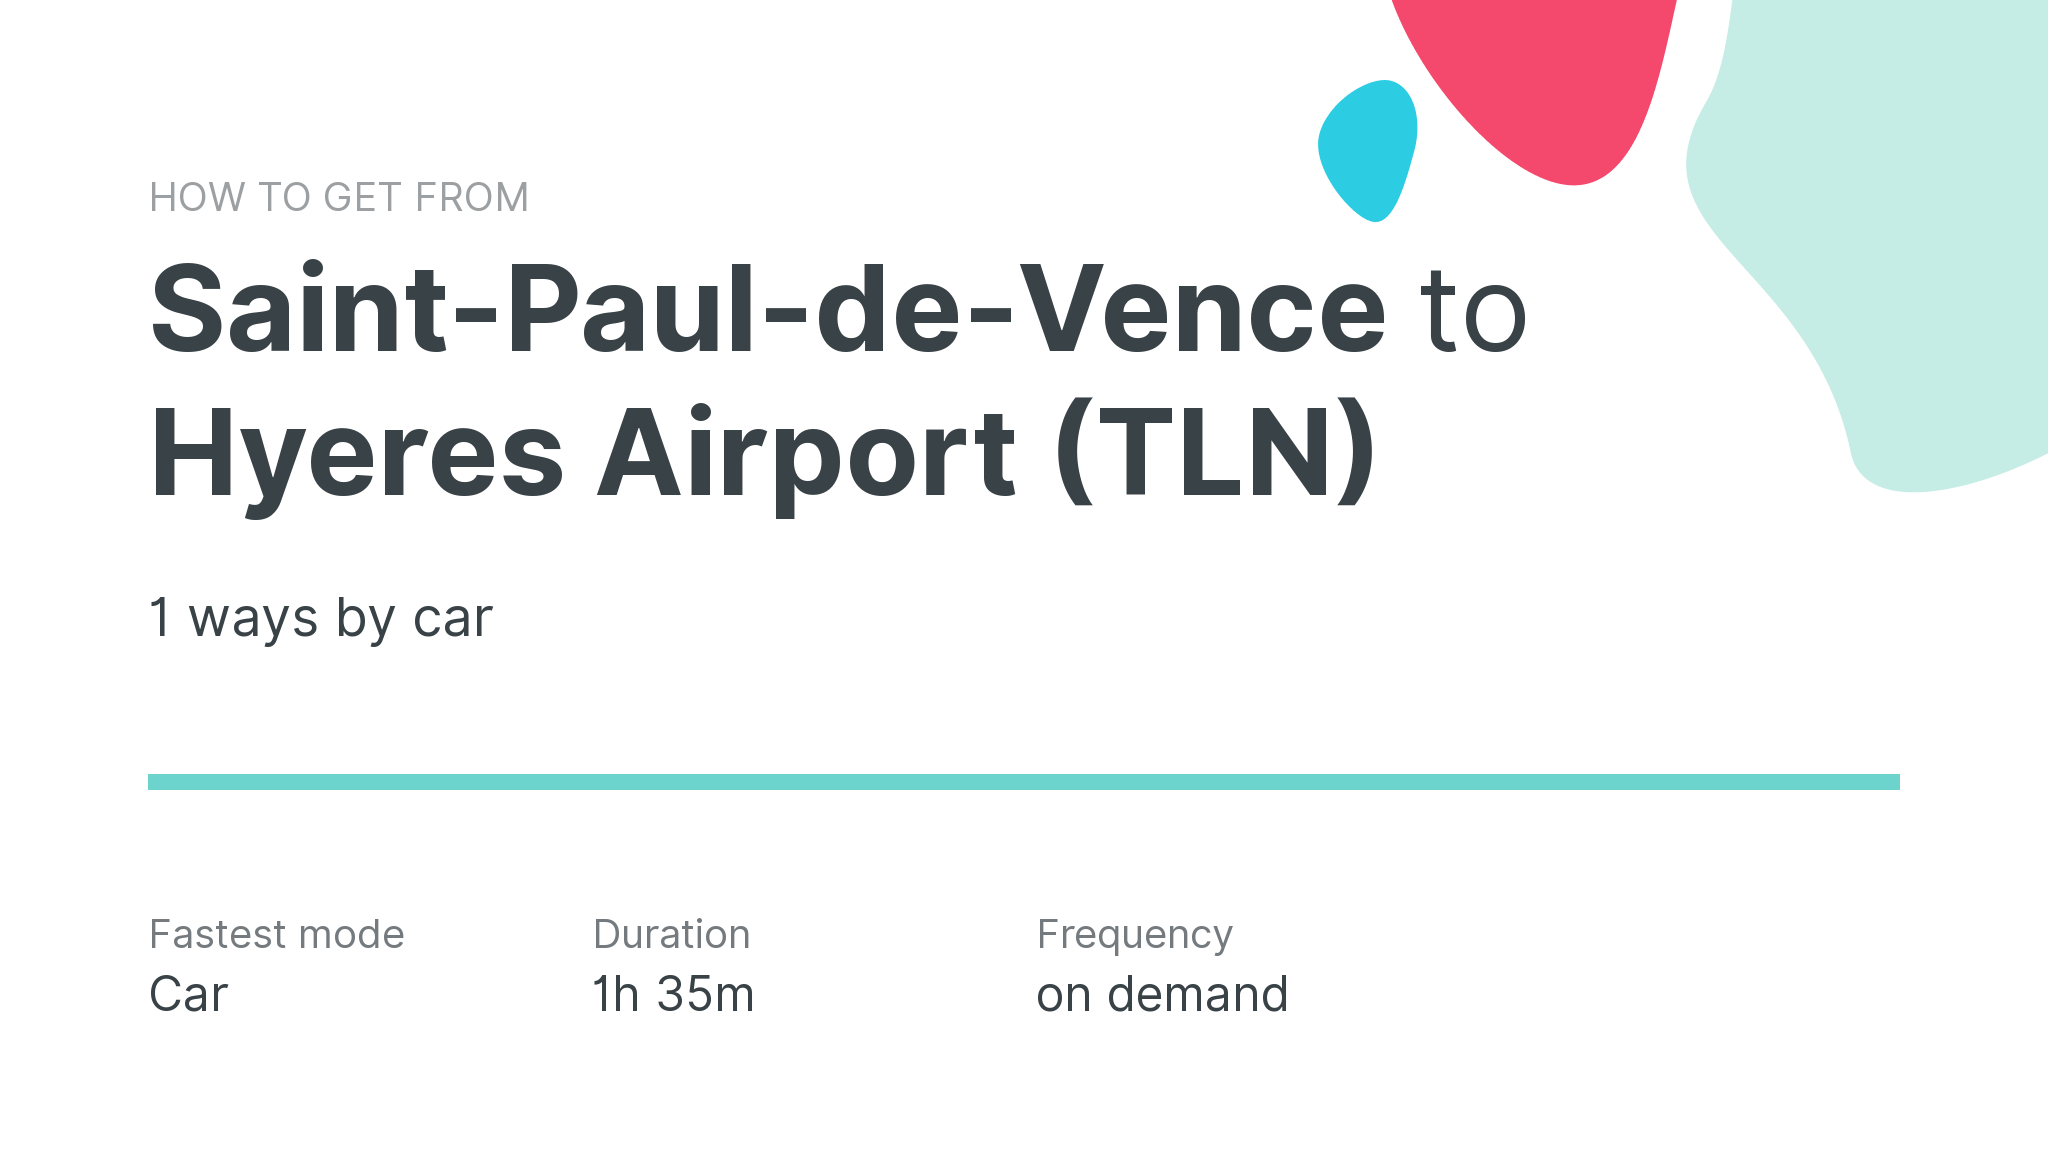 How do I get from Saint-Paul-de-Vence to Hyeres Airport (TLN)